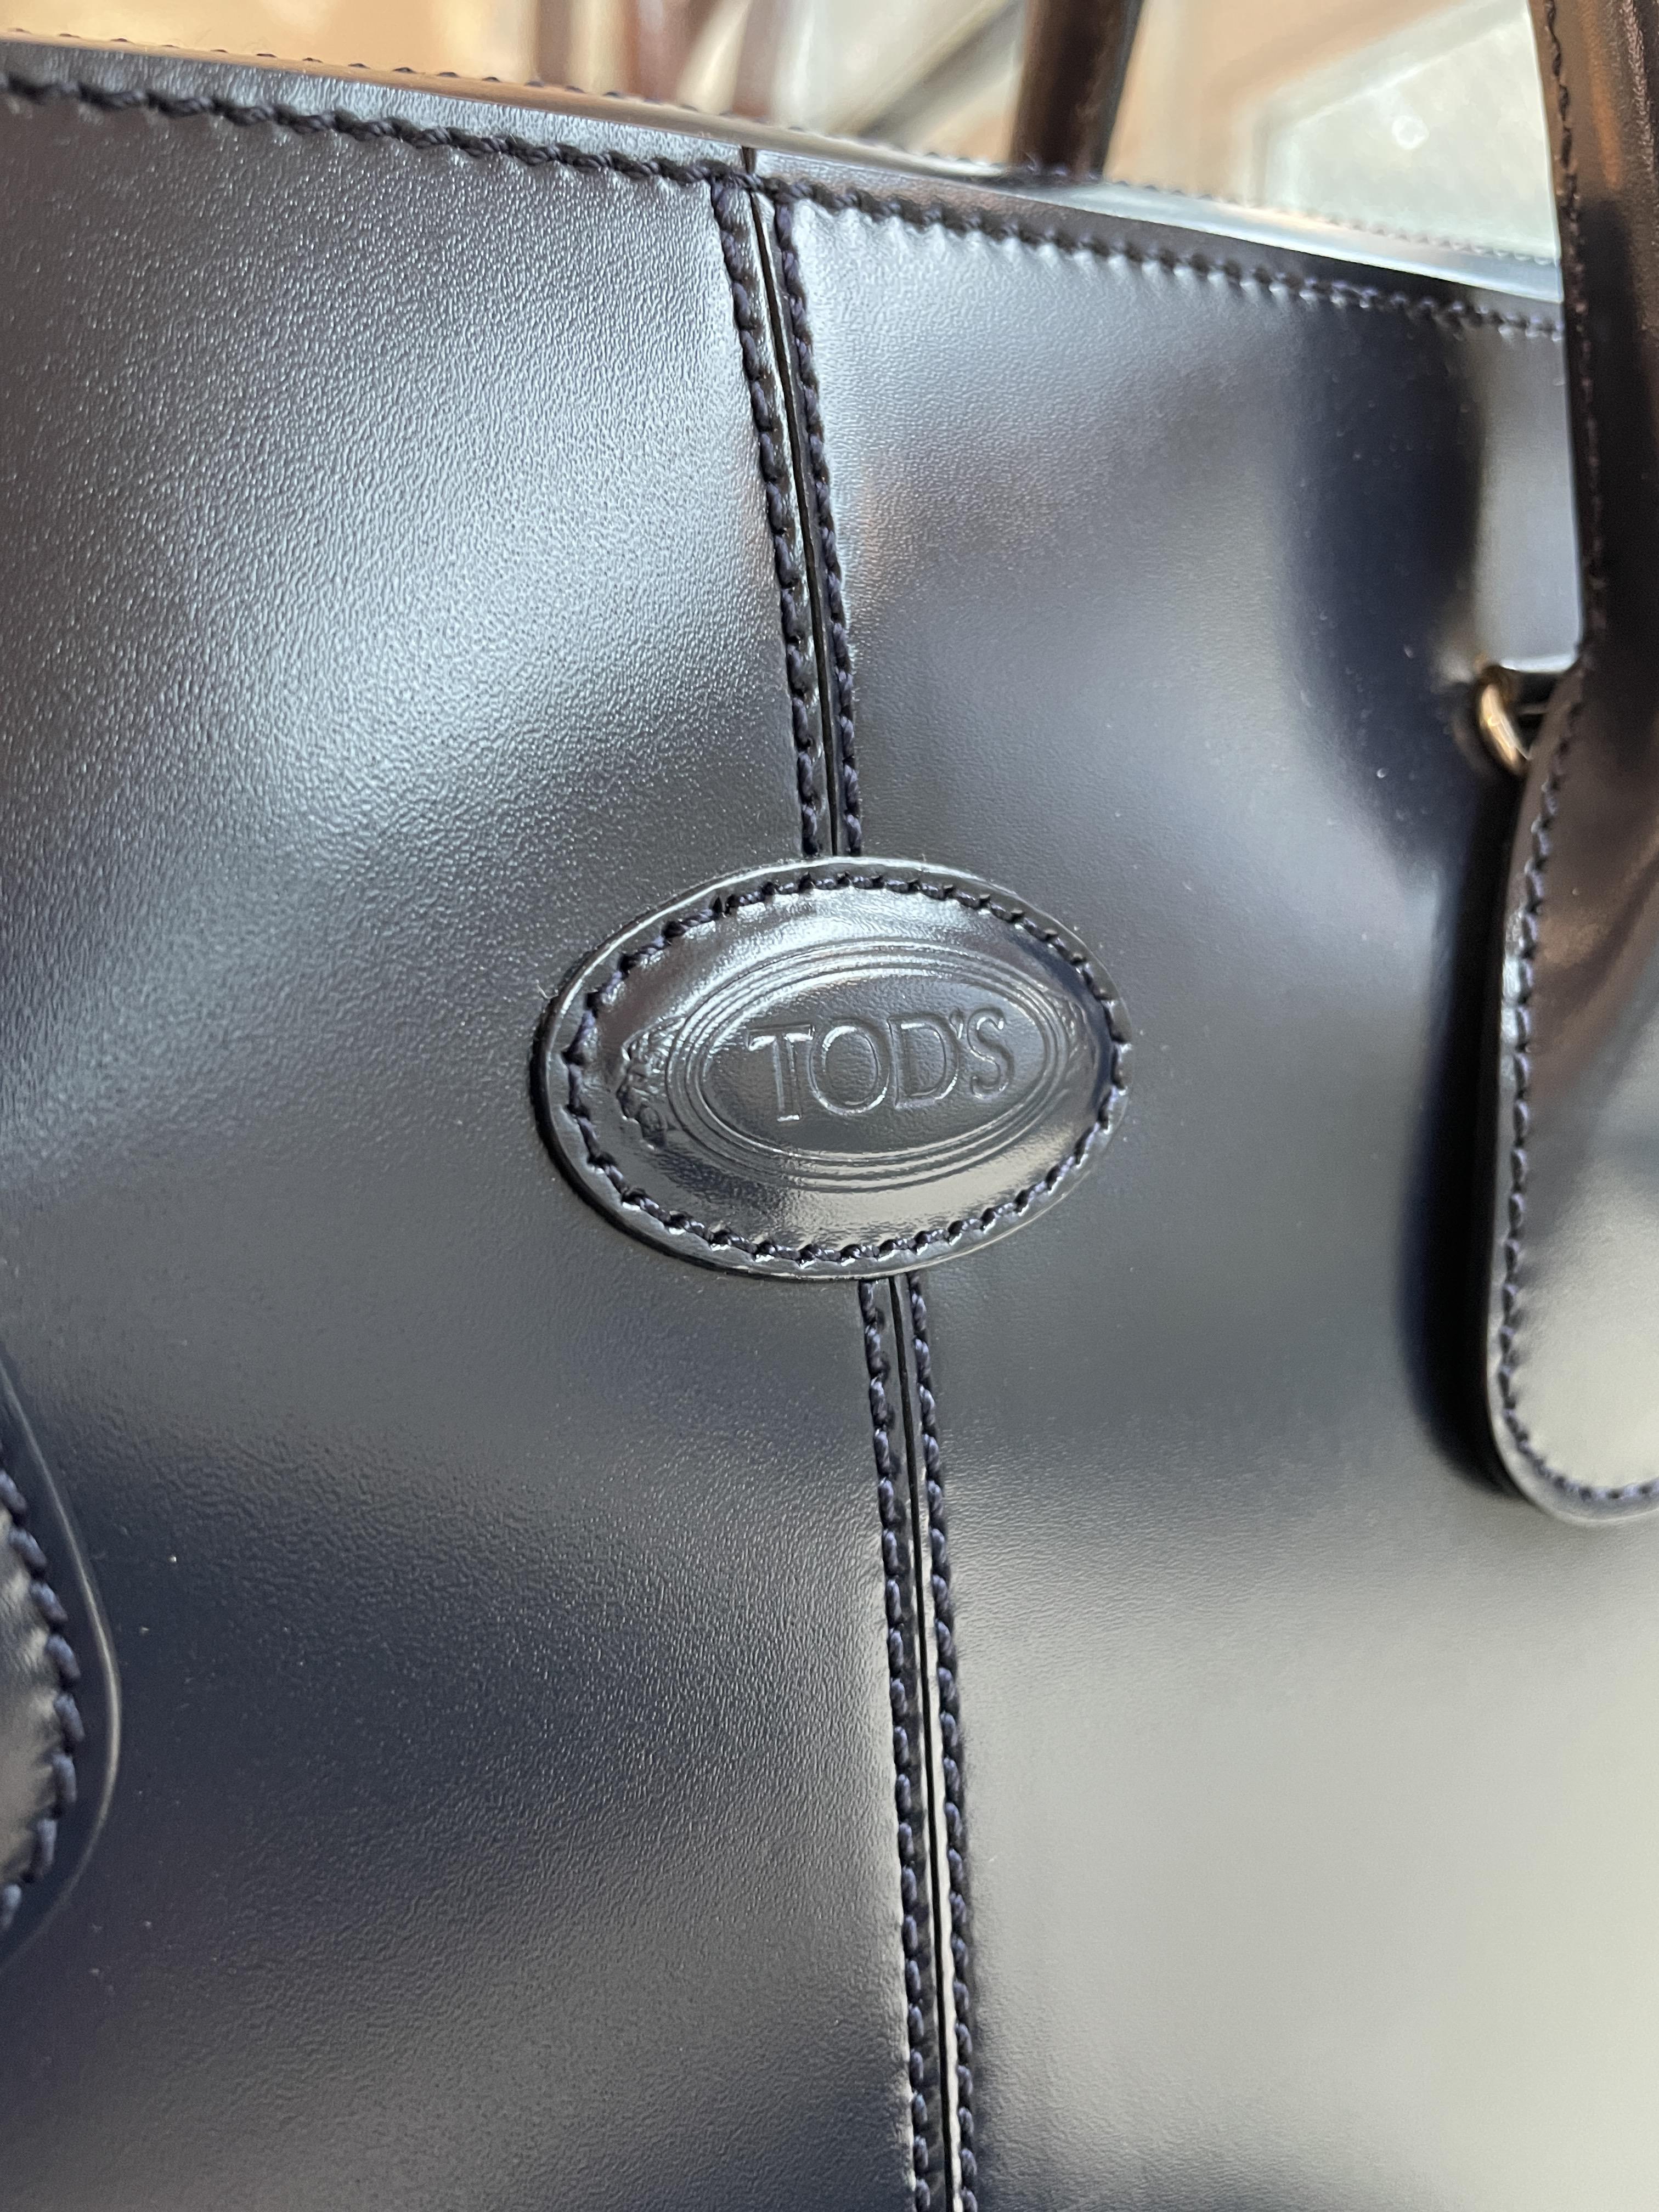 A TOD'S CLASSIC D-BAG - Image 6 of 10